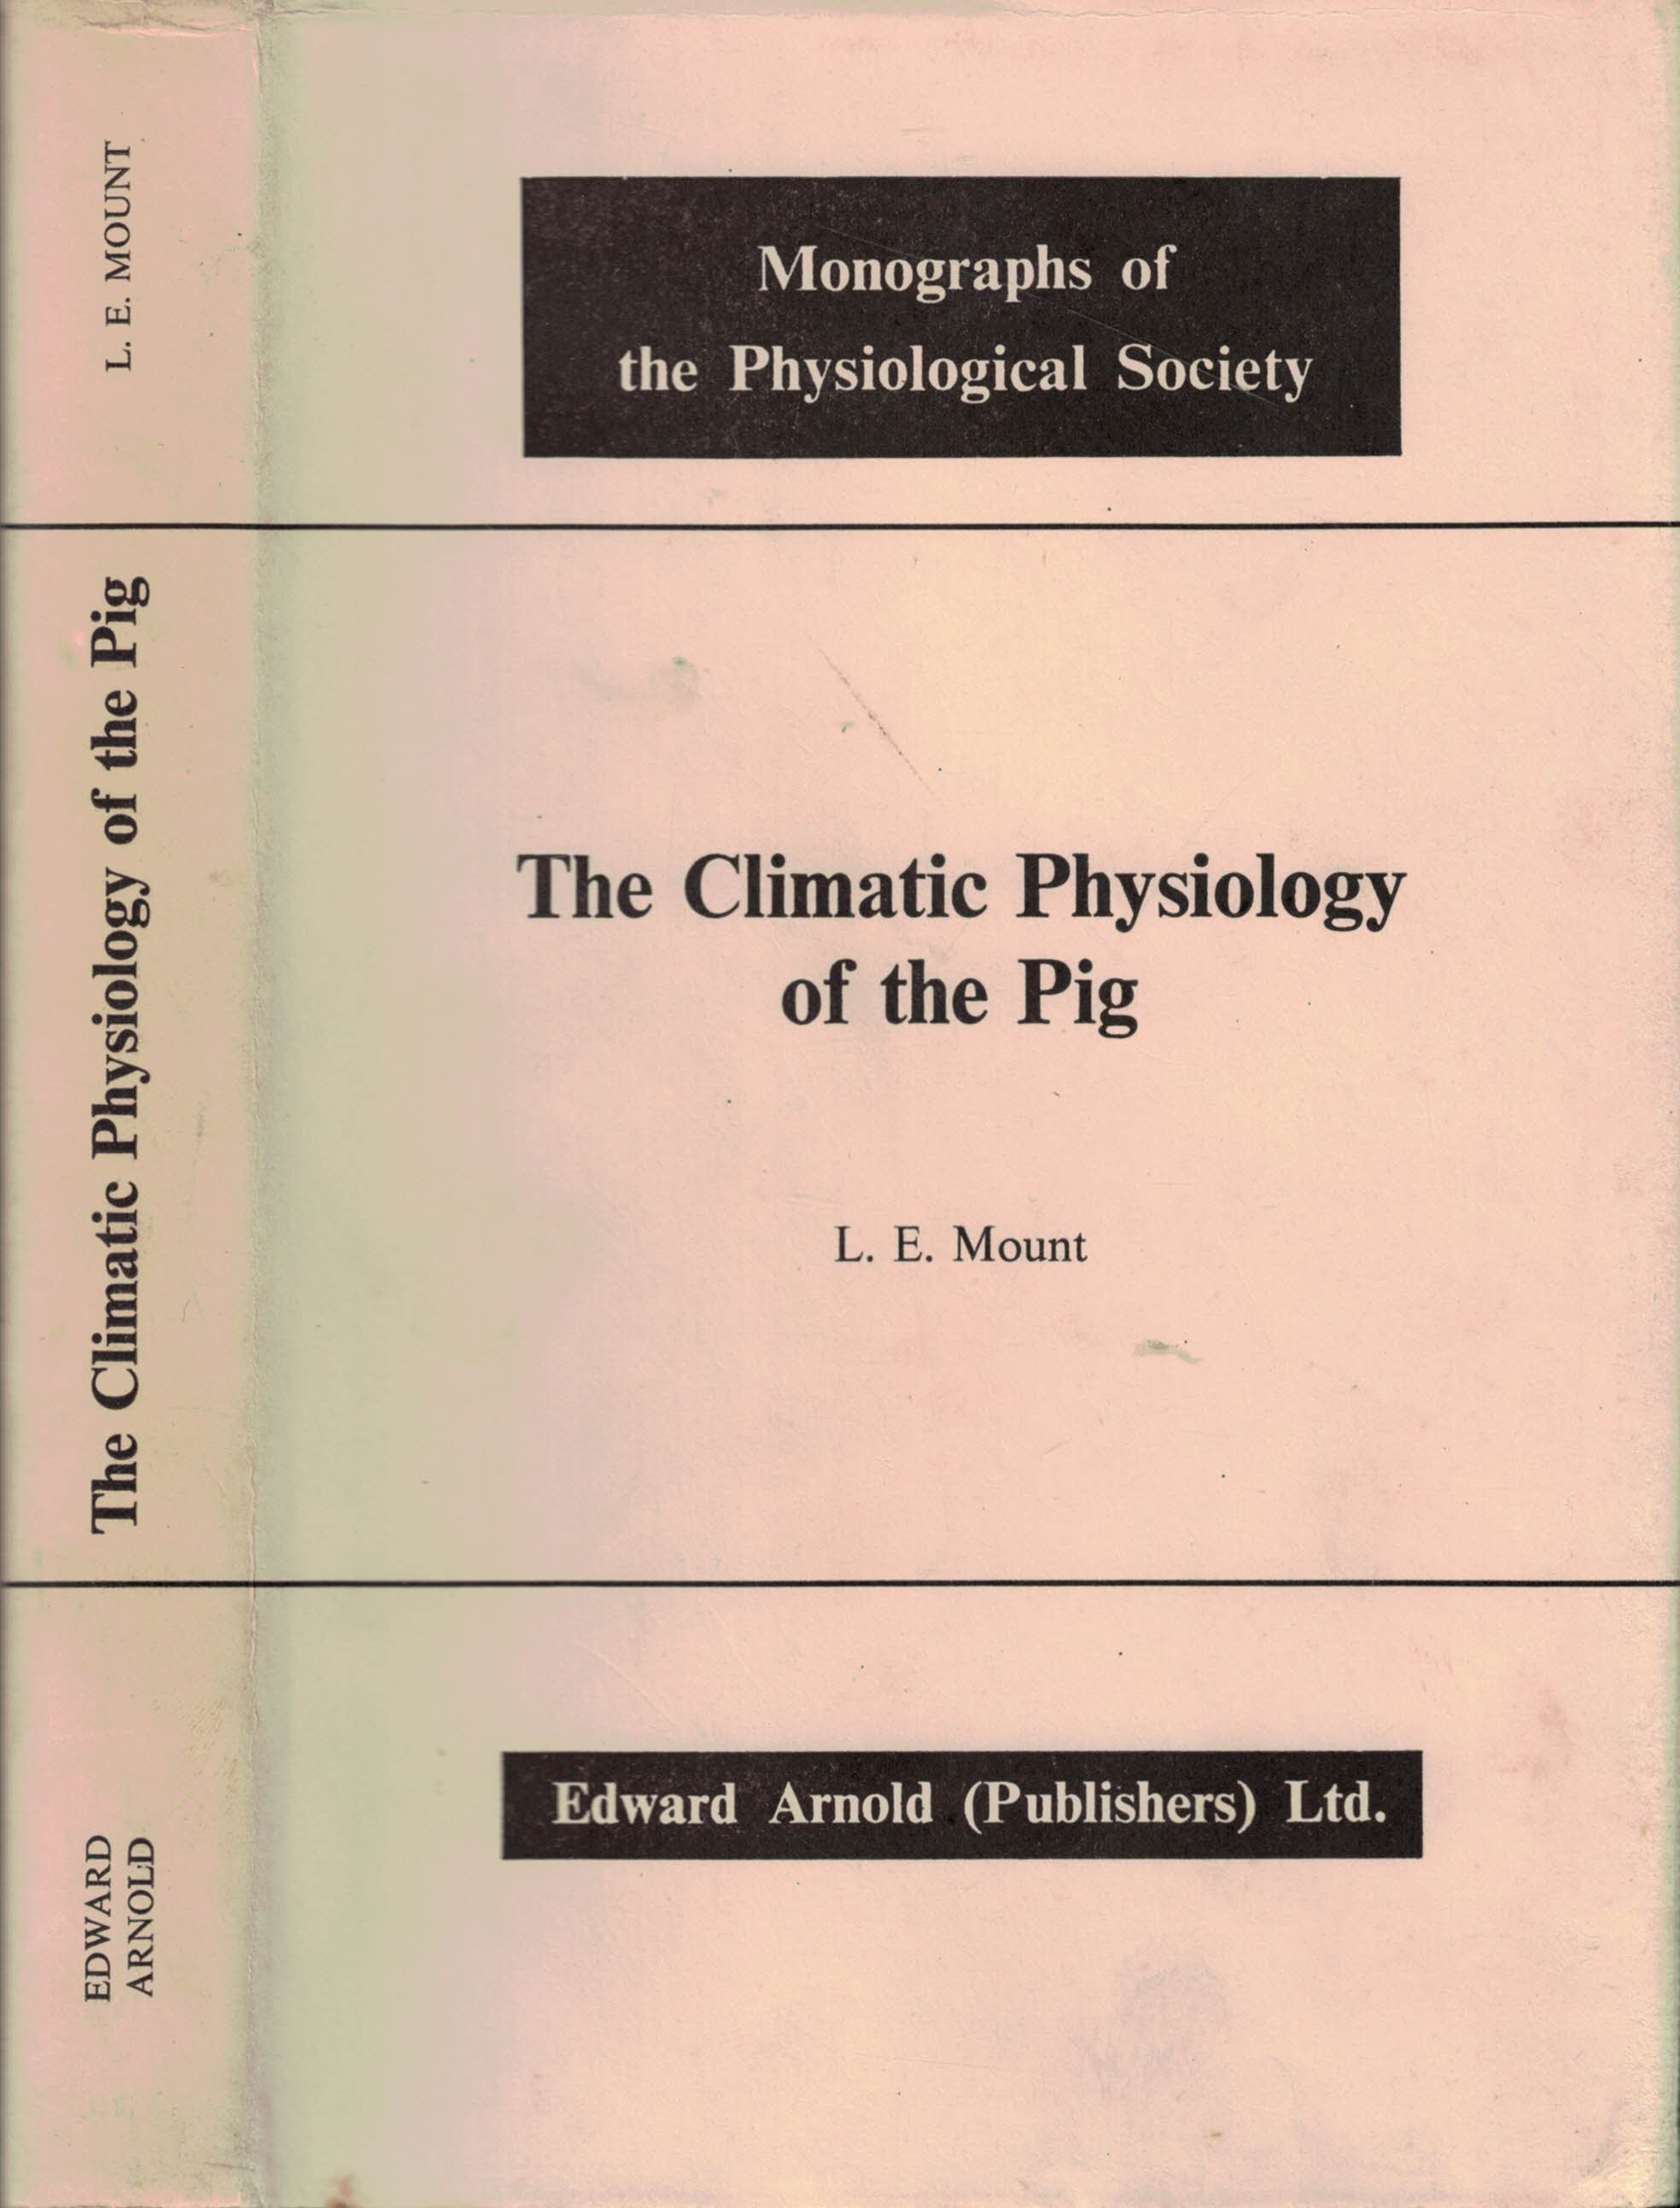 The Climatic Physiology of the Pig. Monographs of the Physiological Society, number 18.